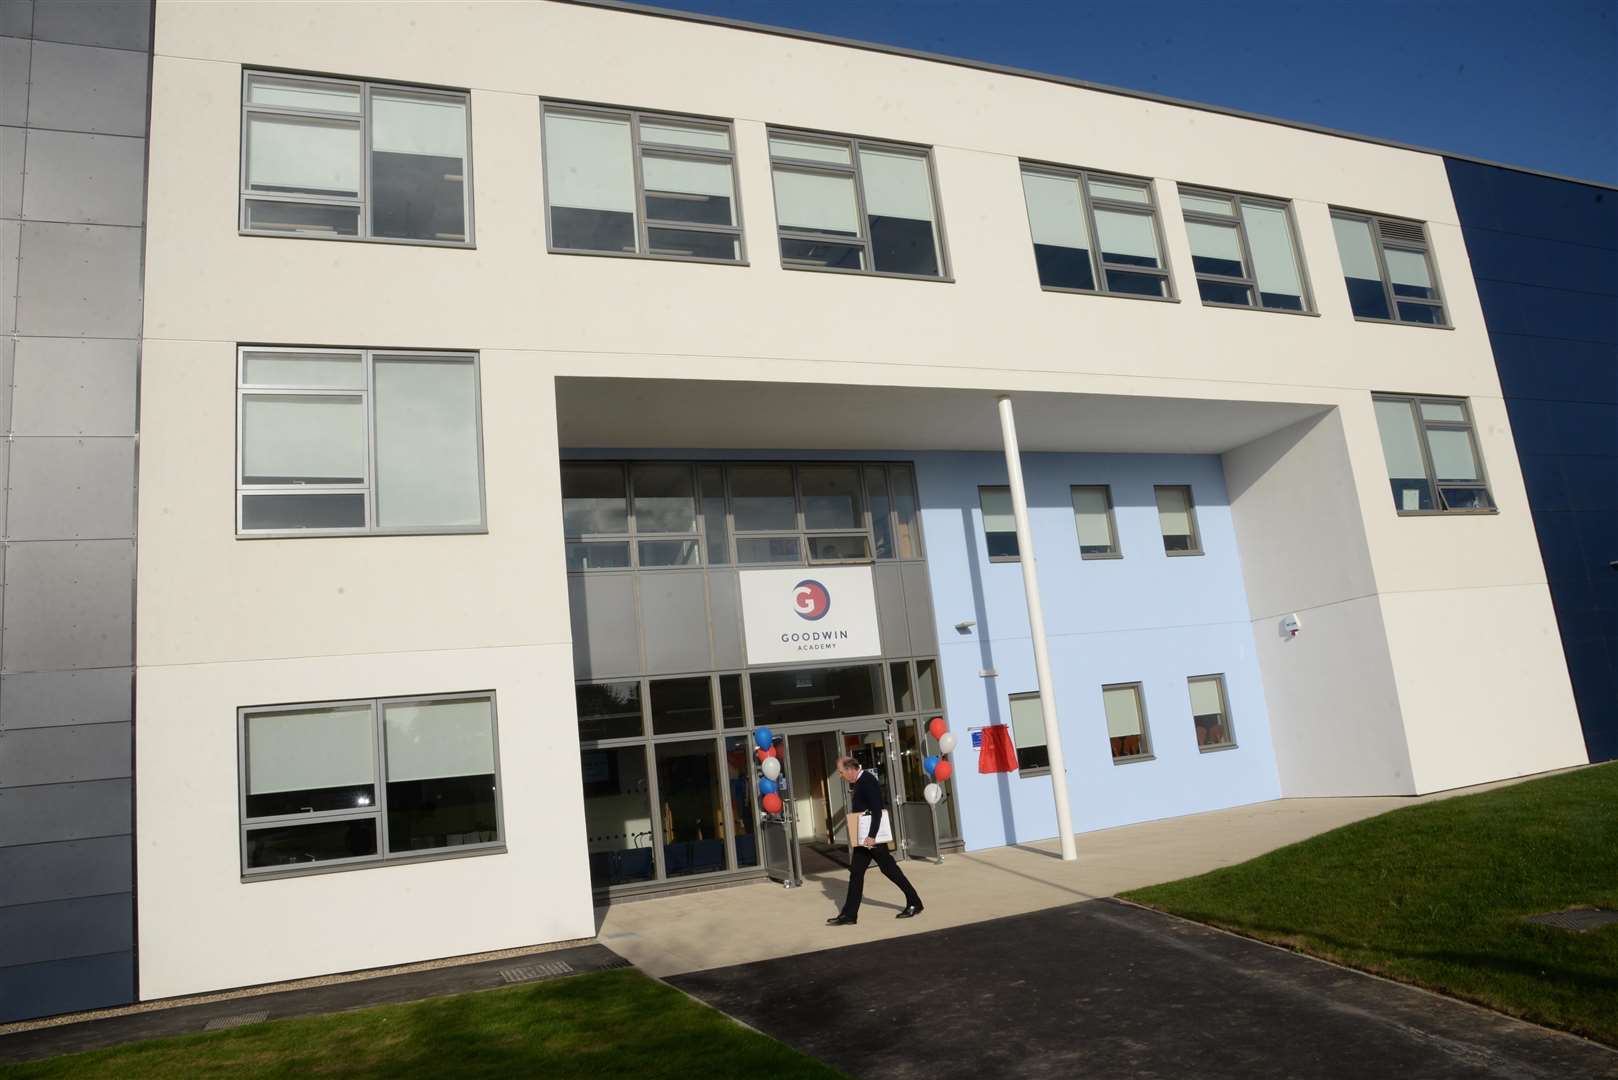 Goodwin Academy in Deal was one of four schools failed by SchoolsCompany